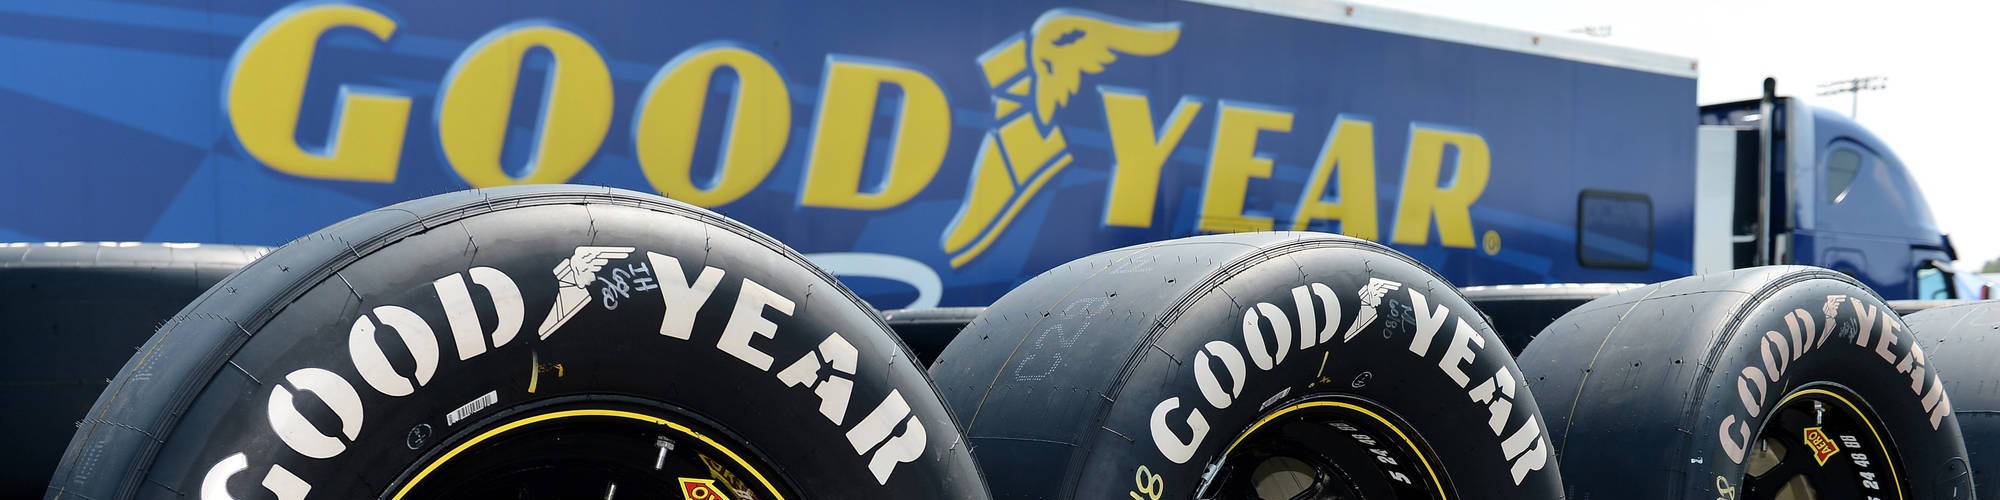 The Goodyear Tire & Rubber Company 